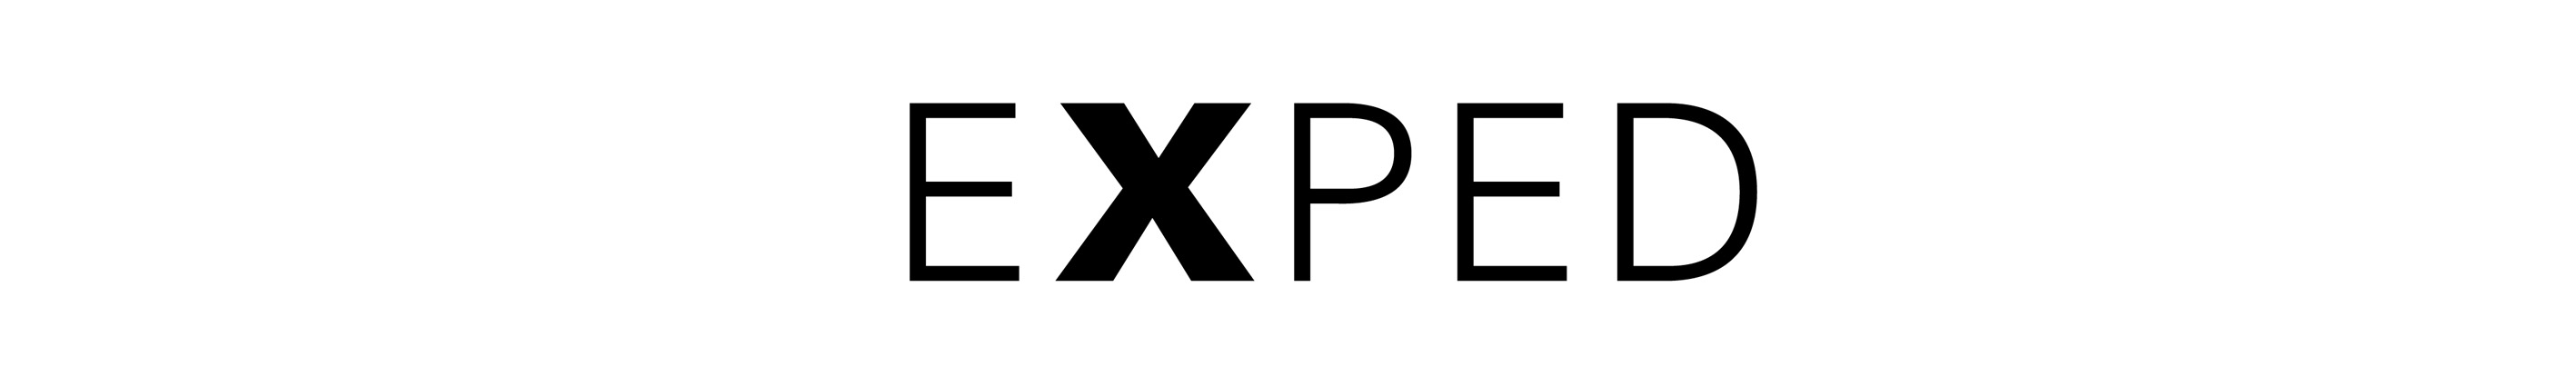 Exped | Gear for Adventure | Toprope Shop